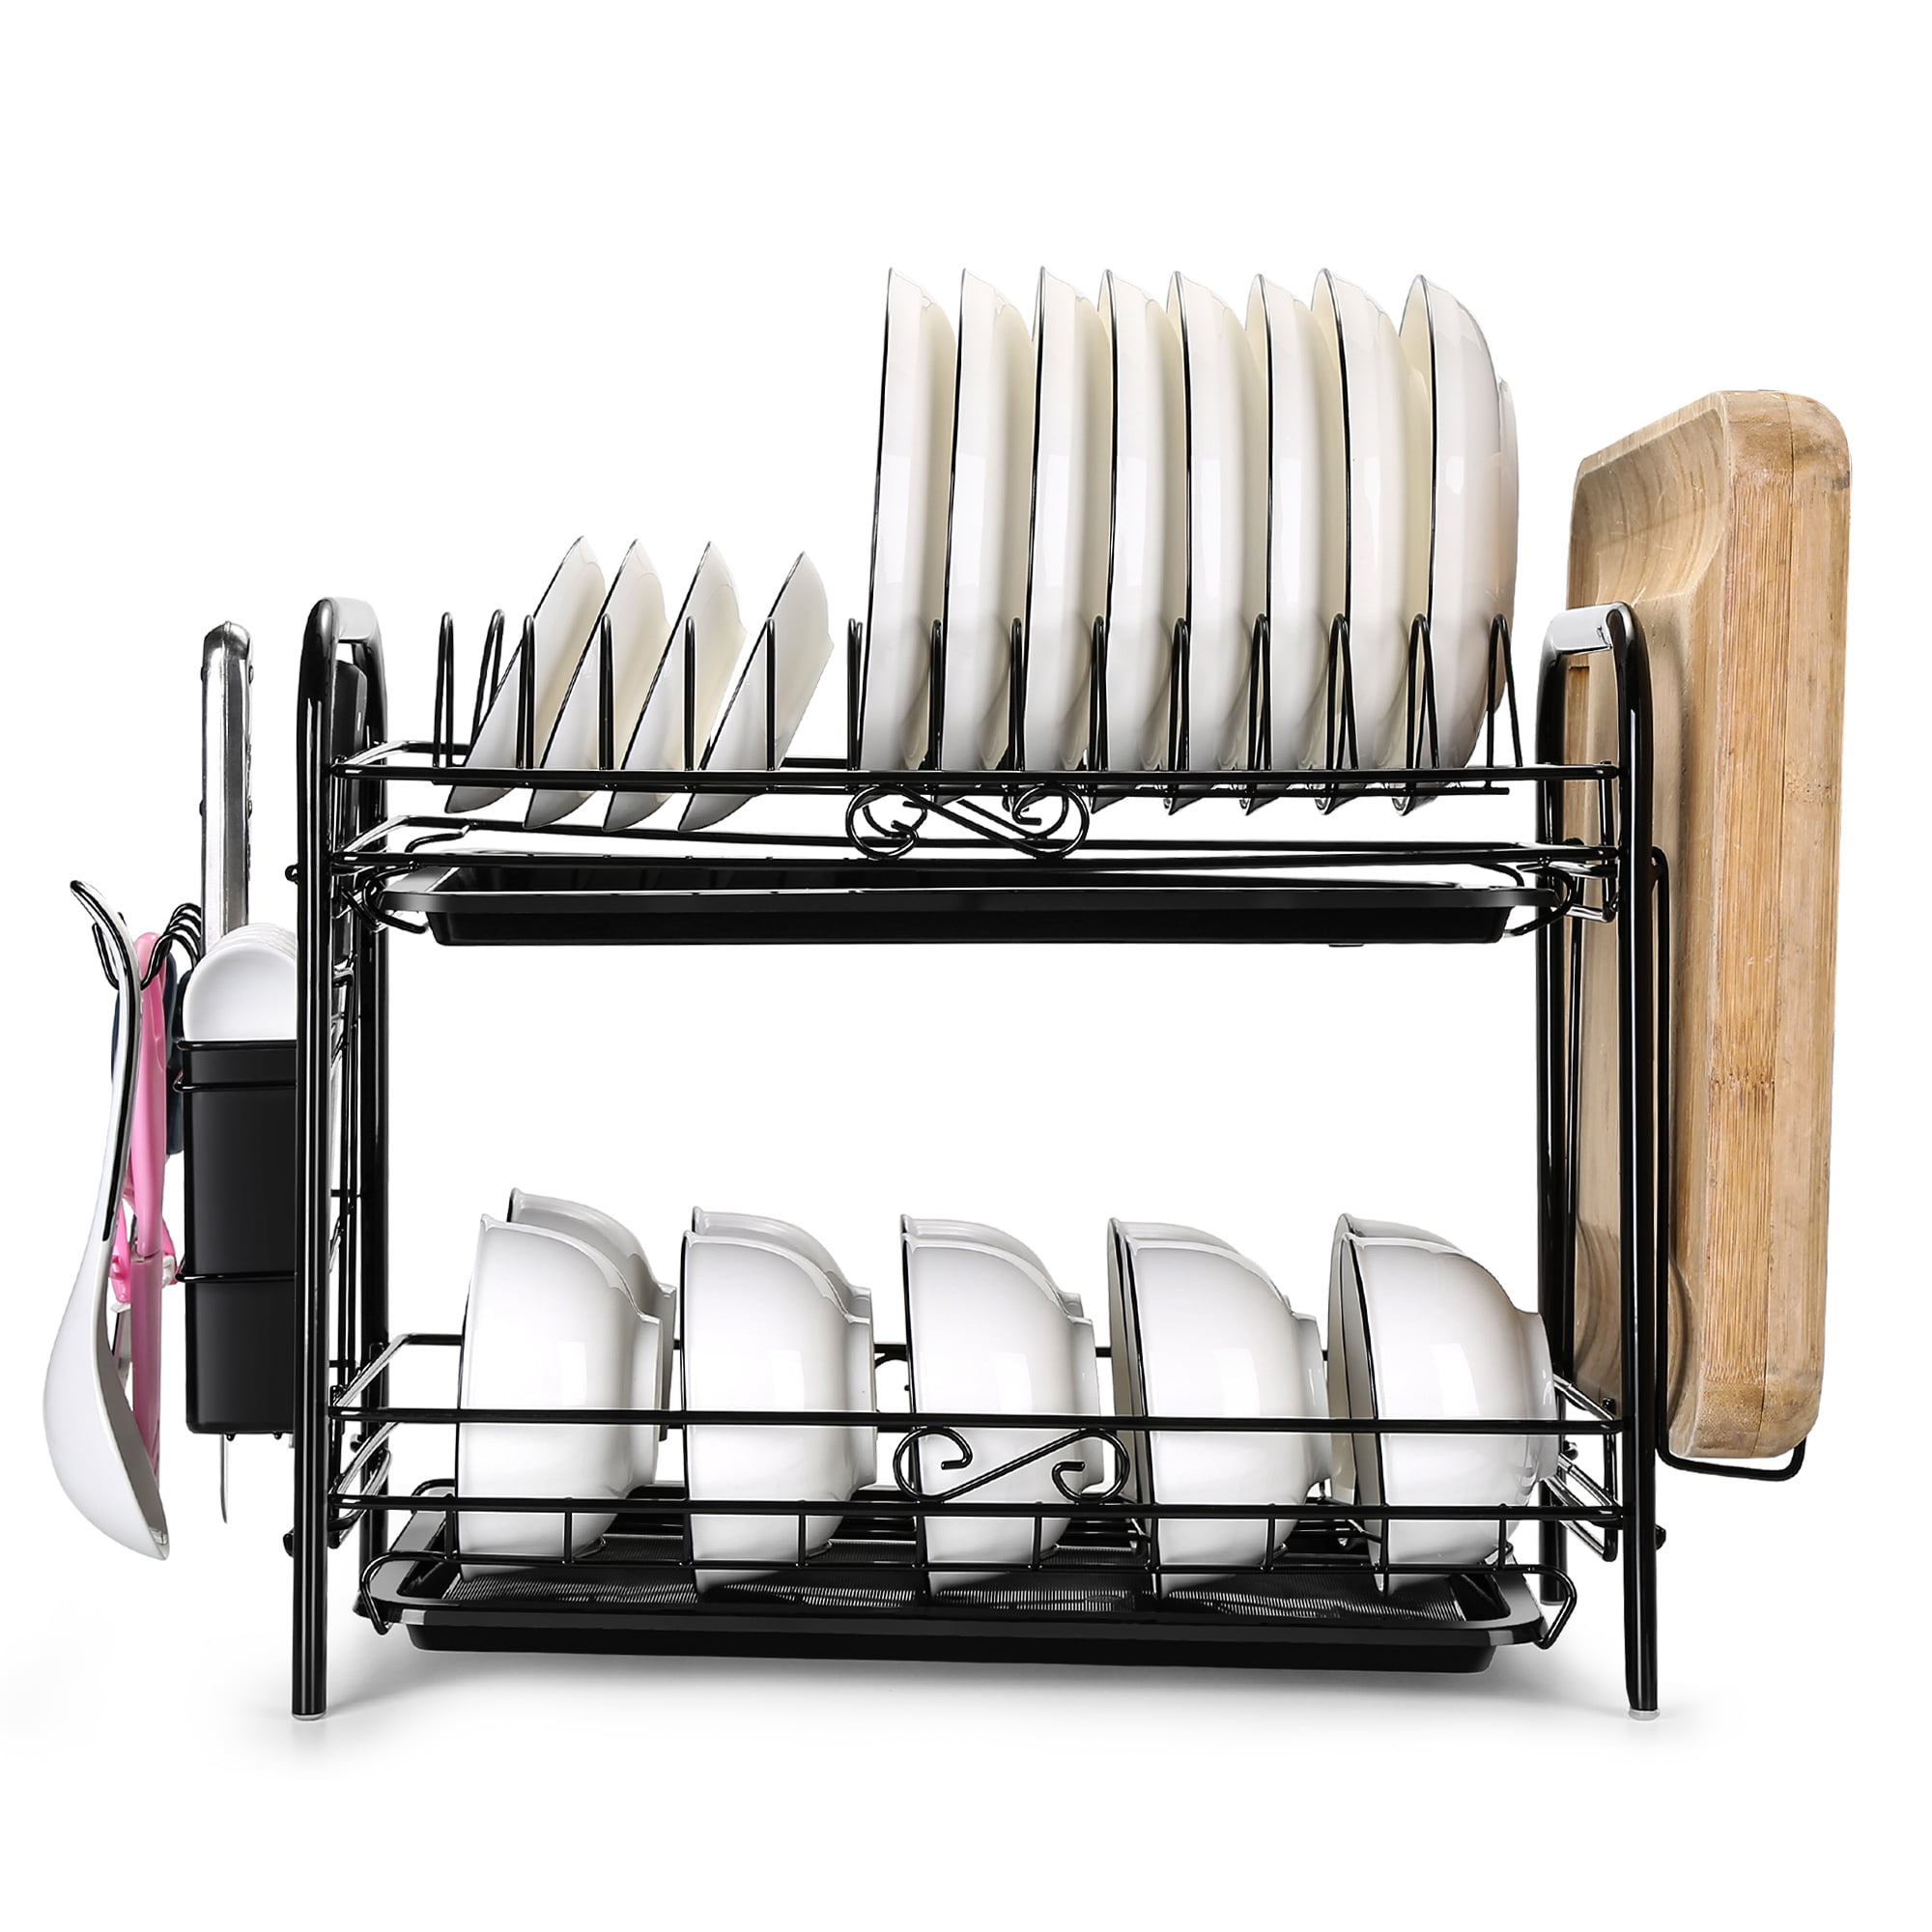 Cambond 2 Tier Metal Dish Drying Rack with Cup Holder